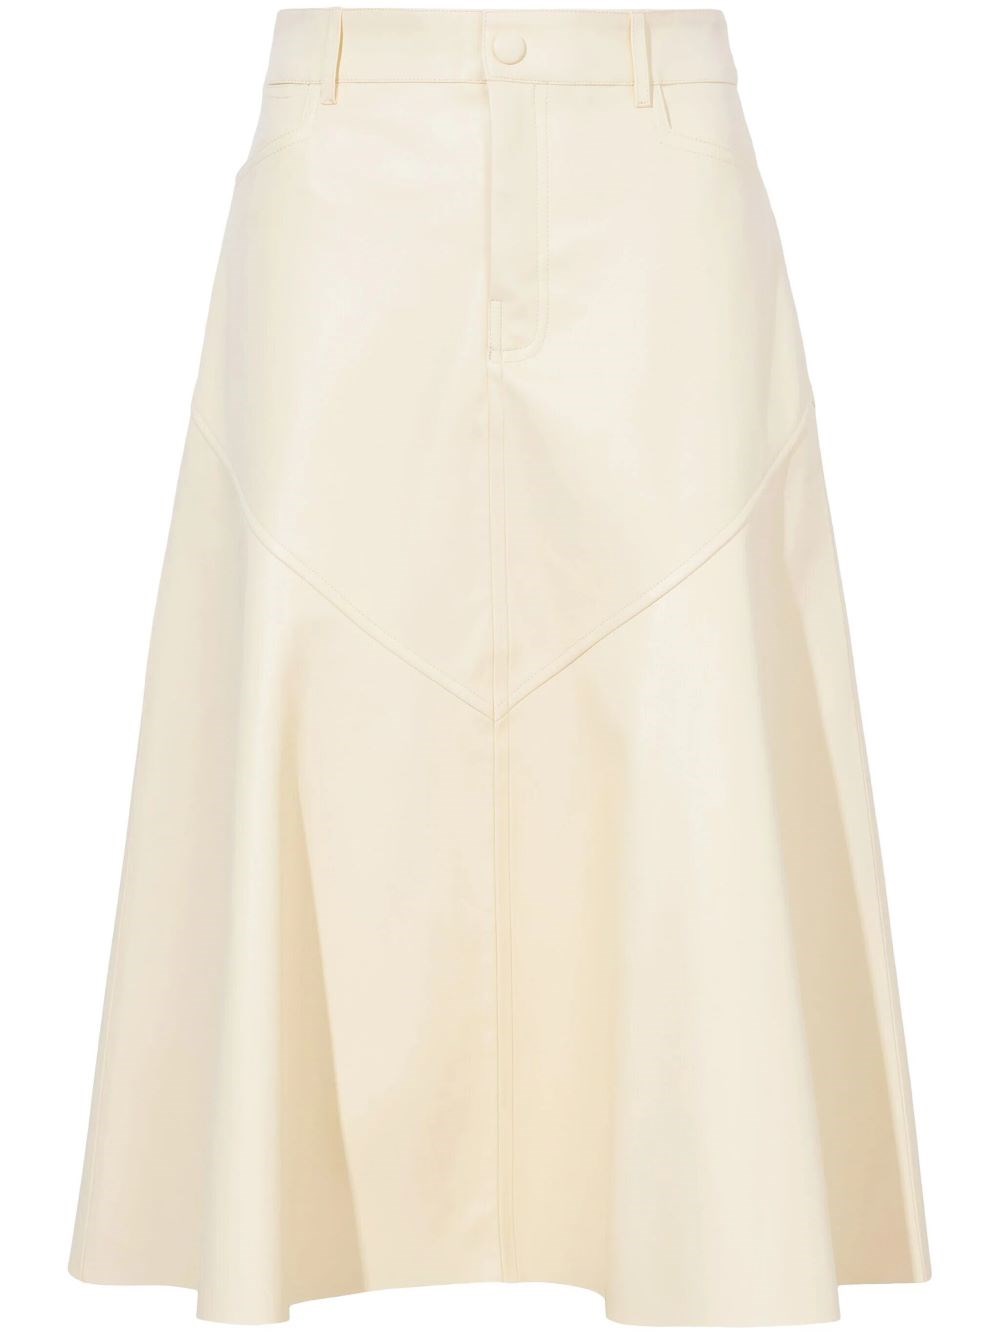 Proenza Schouler White Label Jesse Faux Leather Skirt In White